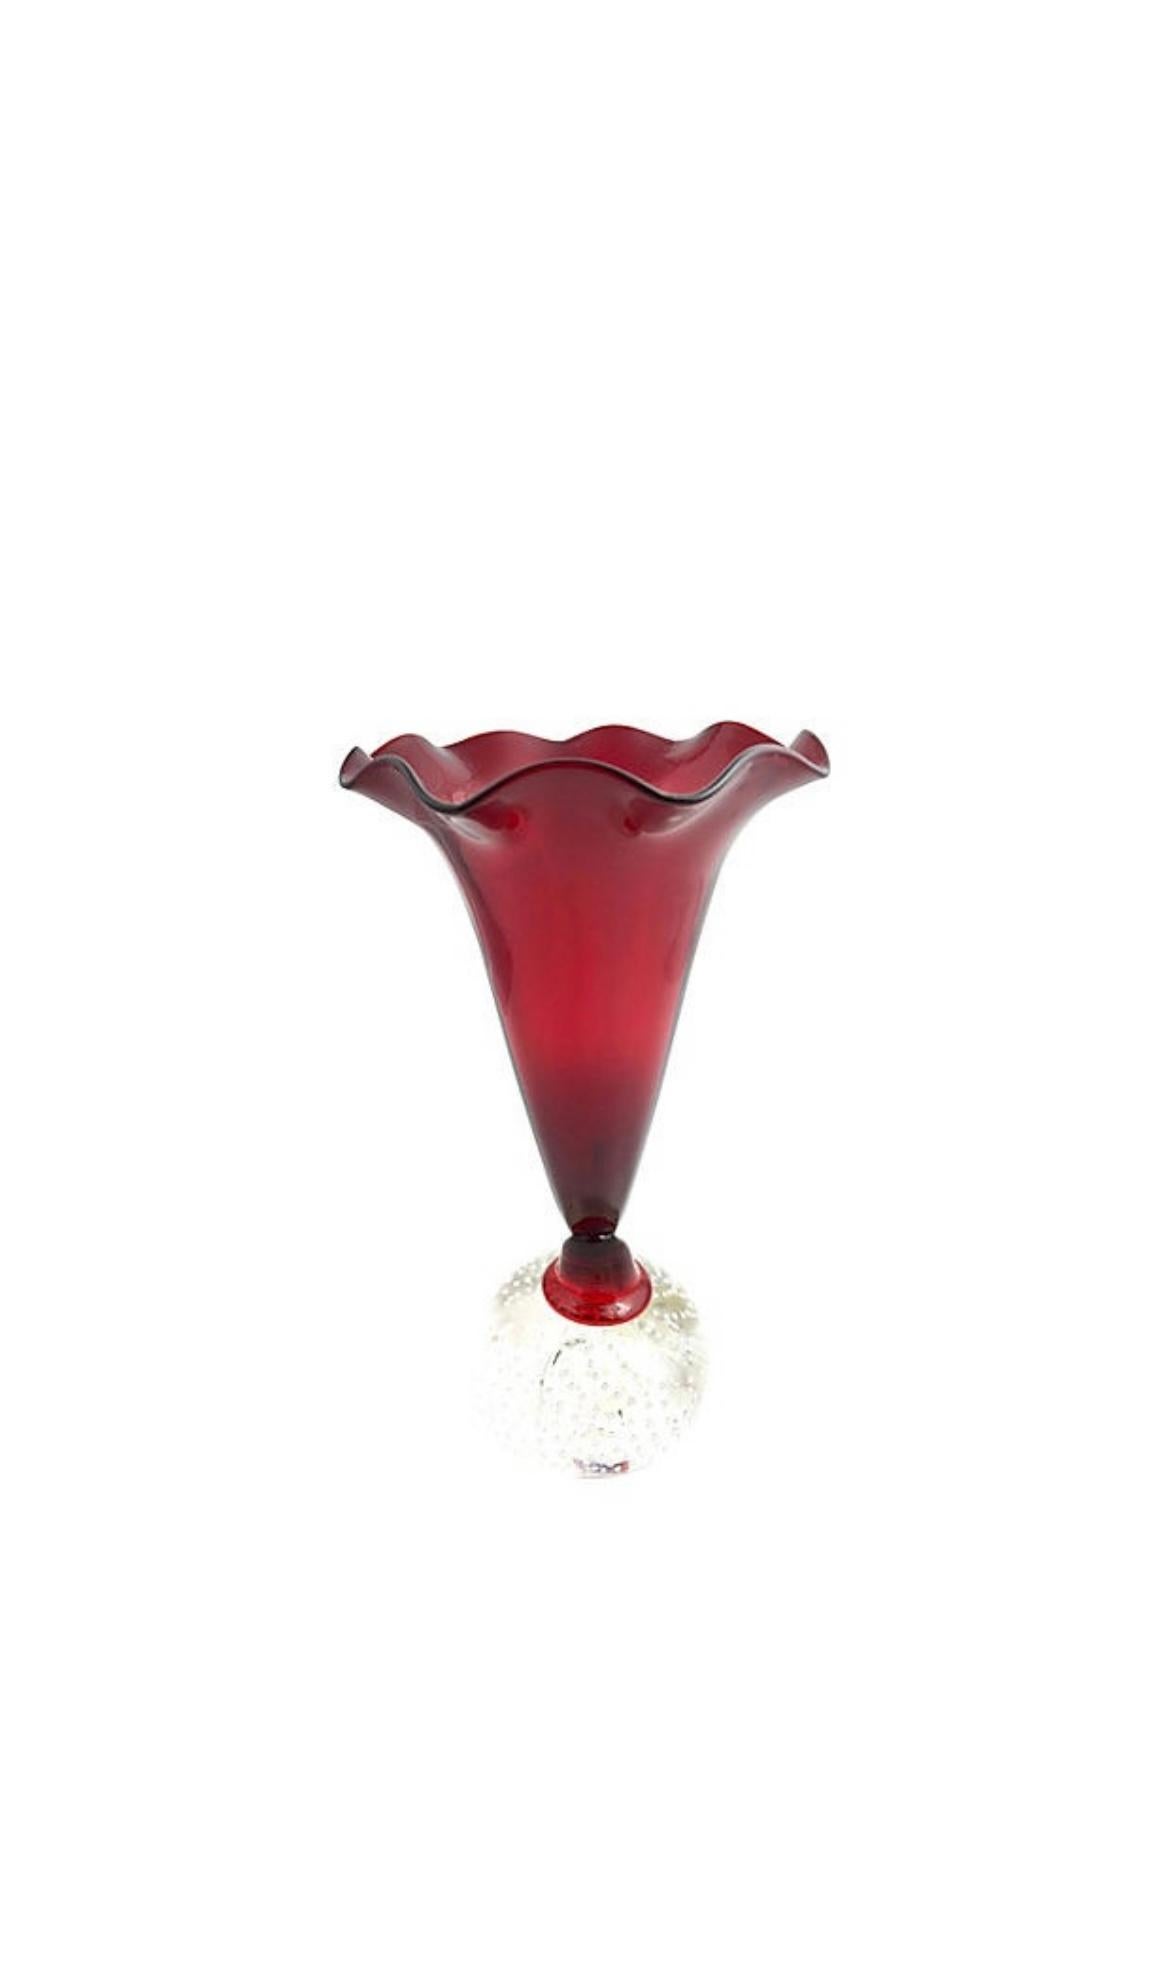 Collection of Early 20th Century Pairpoint Red Glass Vase Compotes Candle Holder 3